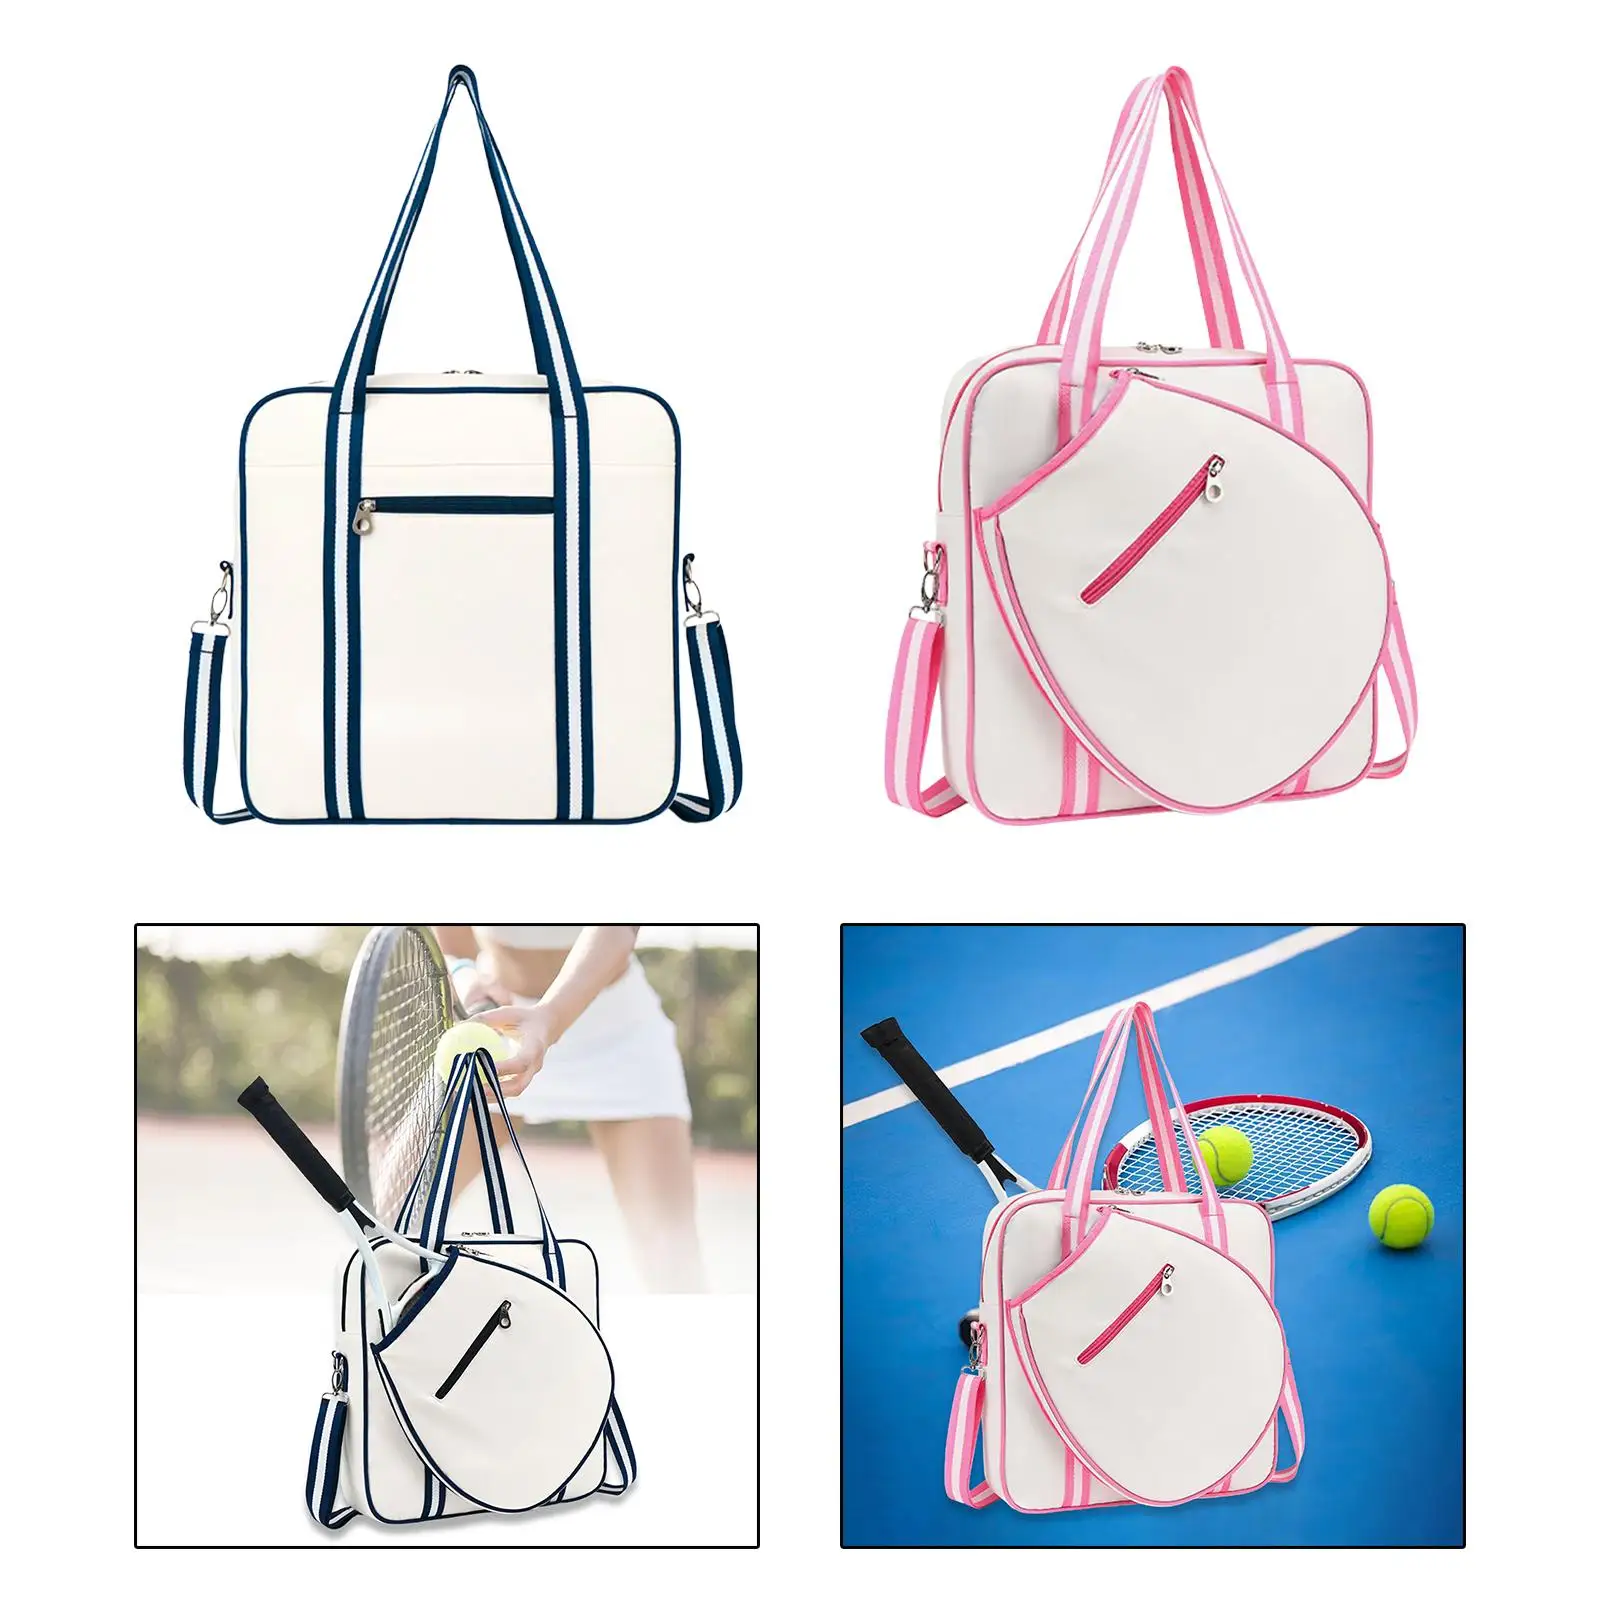 Tennis Racket Shoulder Bag Travel Tote Bag Sturdy Stylish Multipurpose 15x4x15inch with Front Pocket for Outdoor Activities